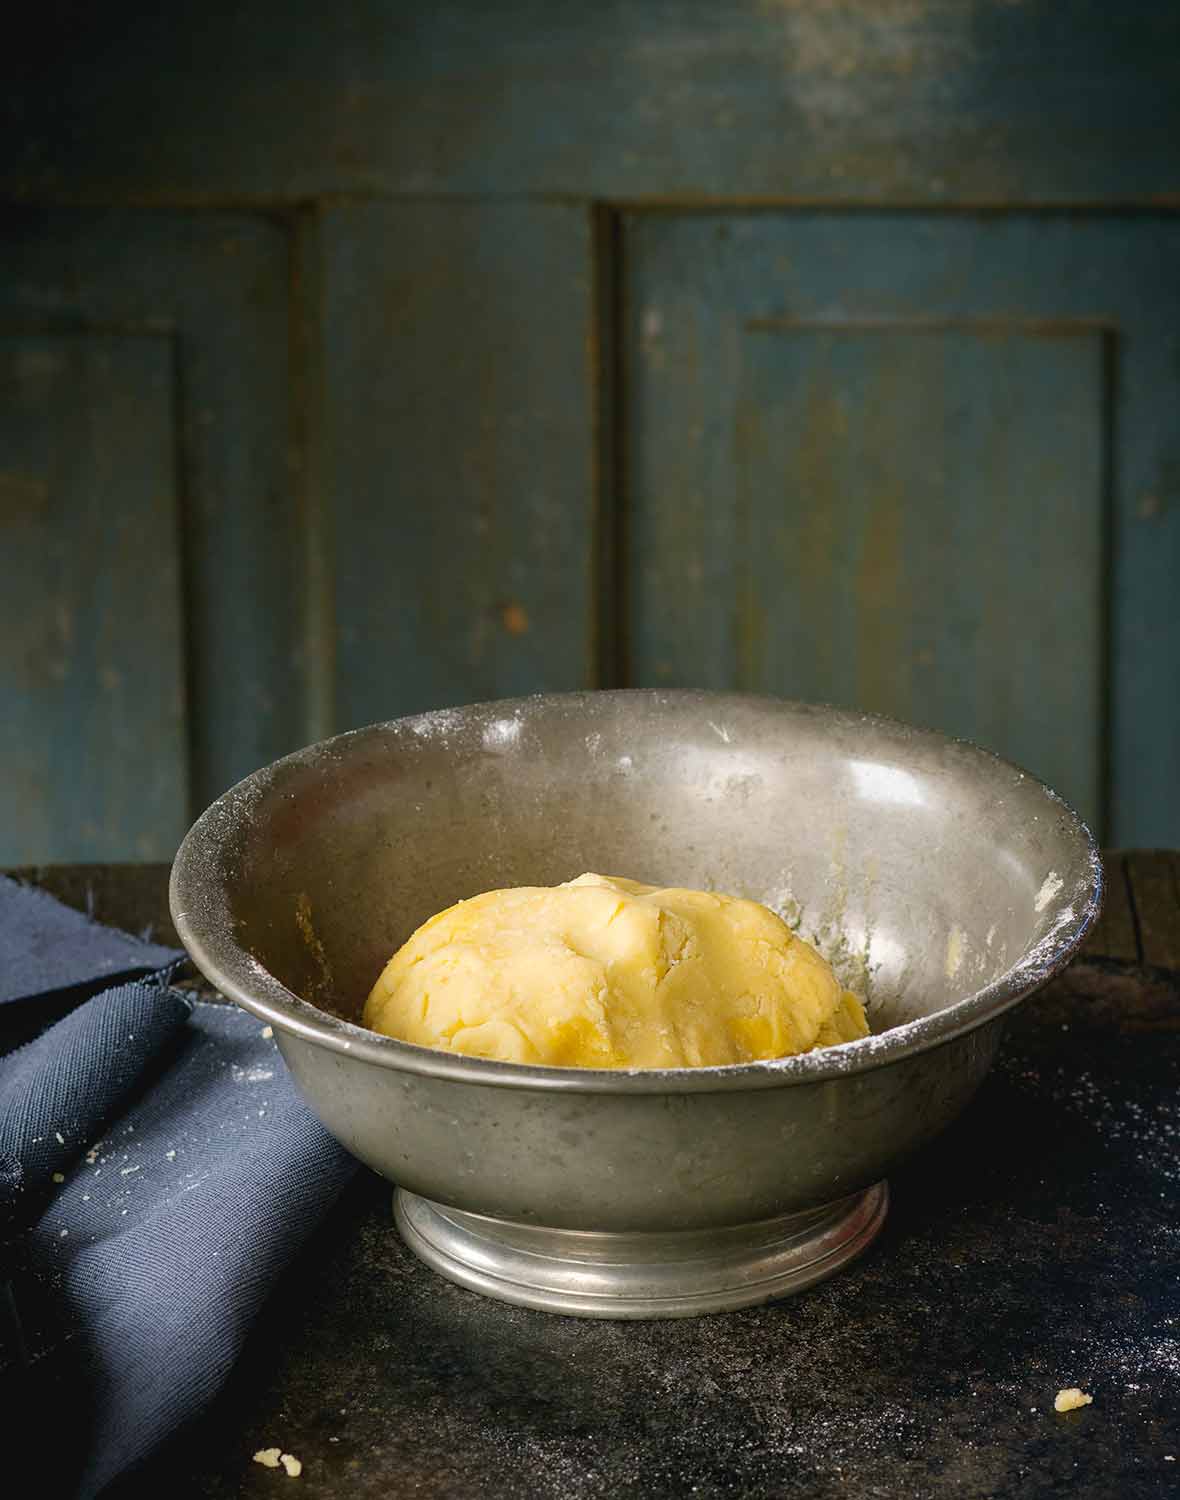 A ball of pâte sucrée in a metal bowl on a wooden table with a napkin next to it.